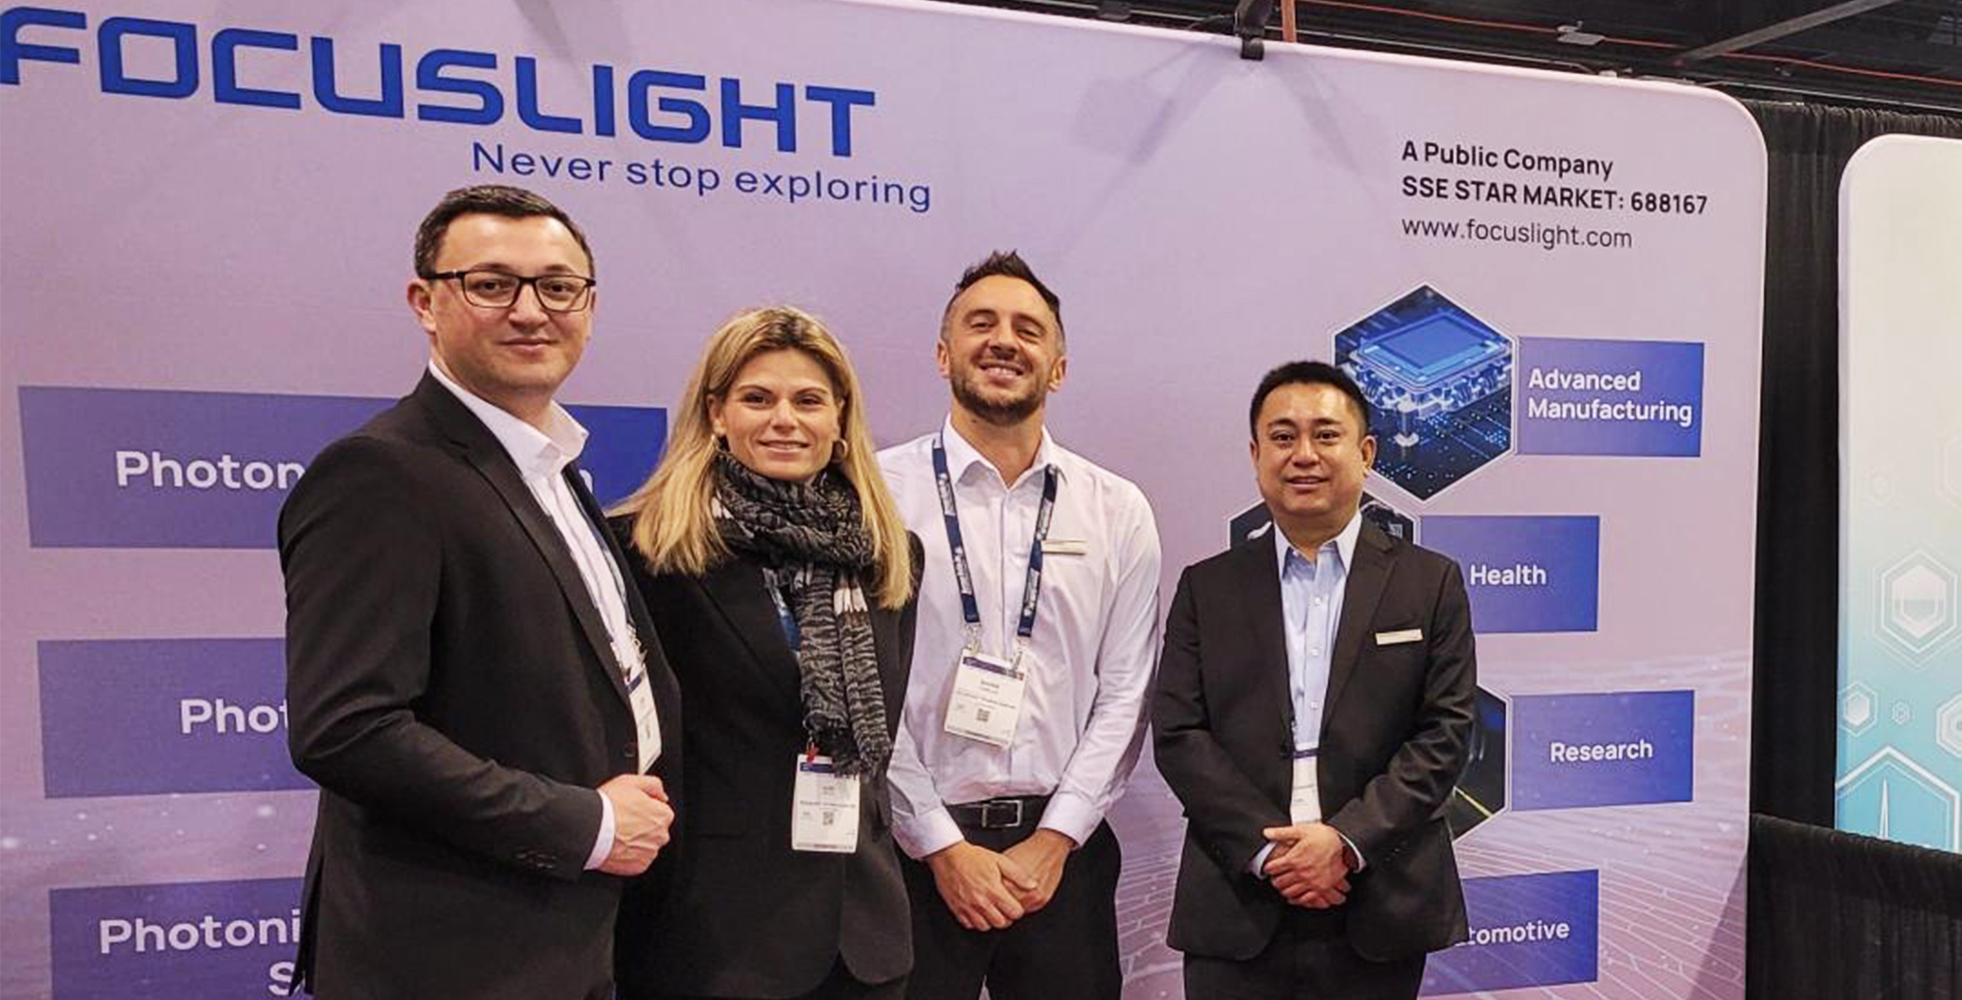 Focuslight is Exhibiting at MD&M West